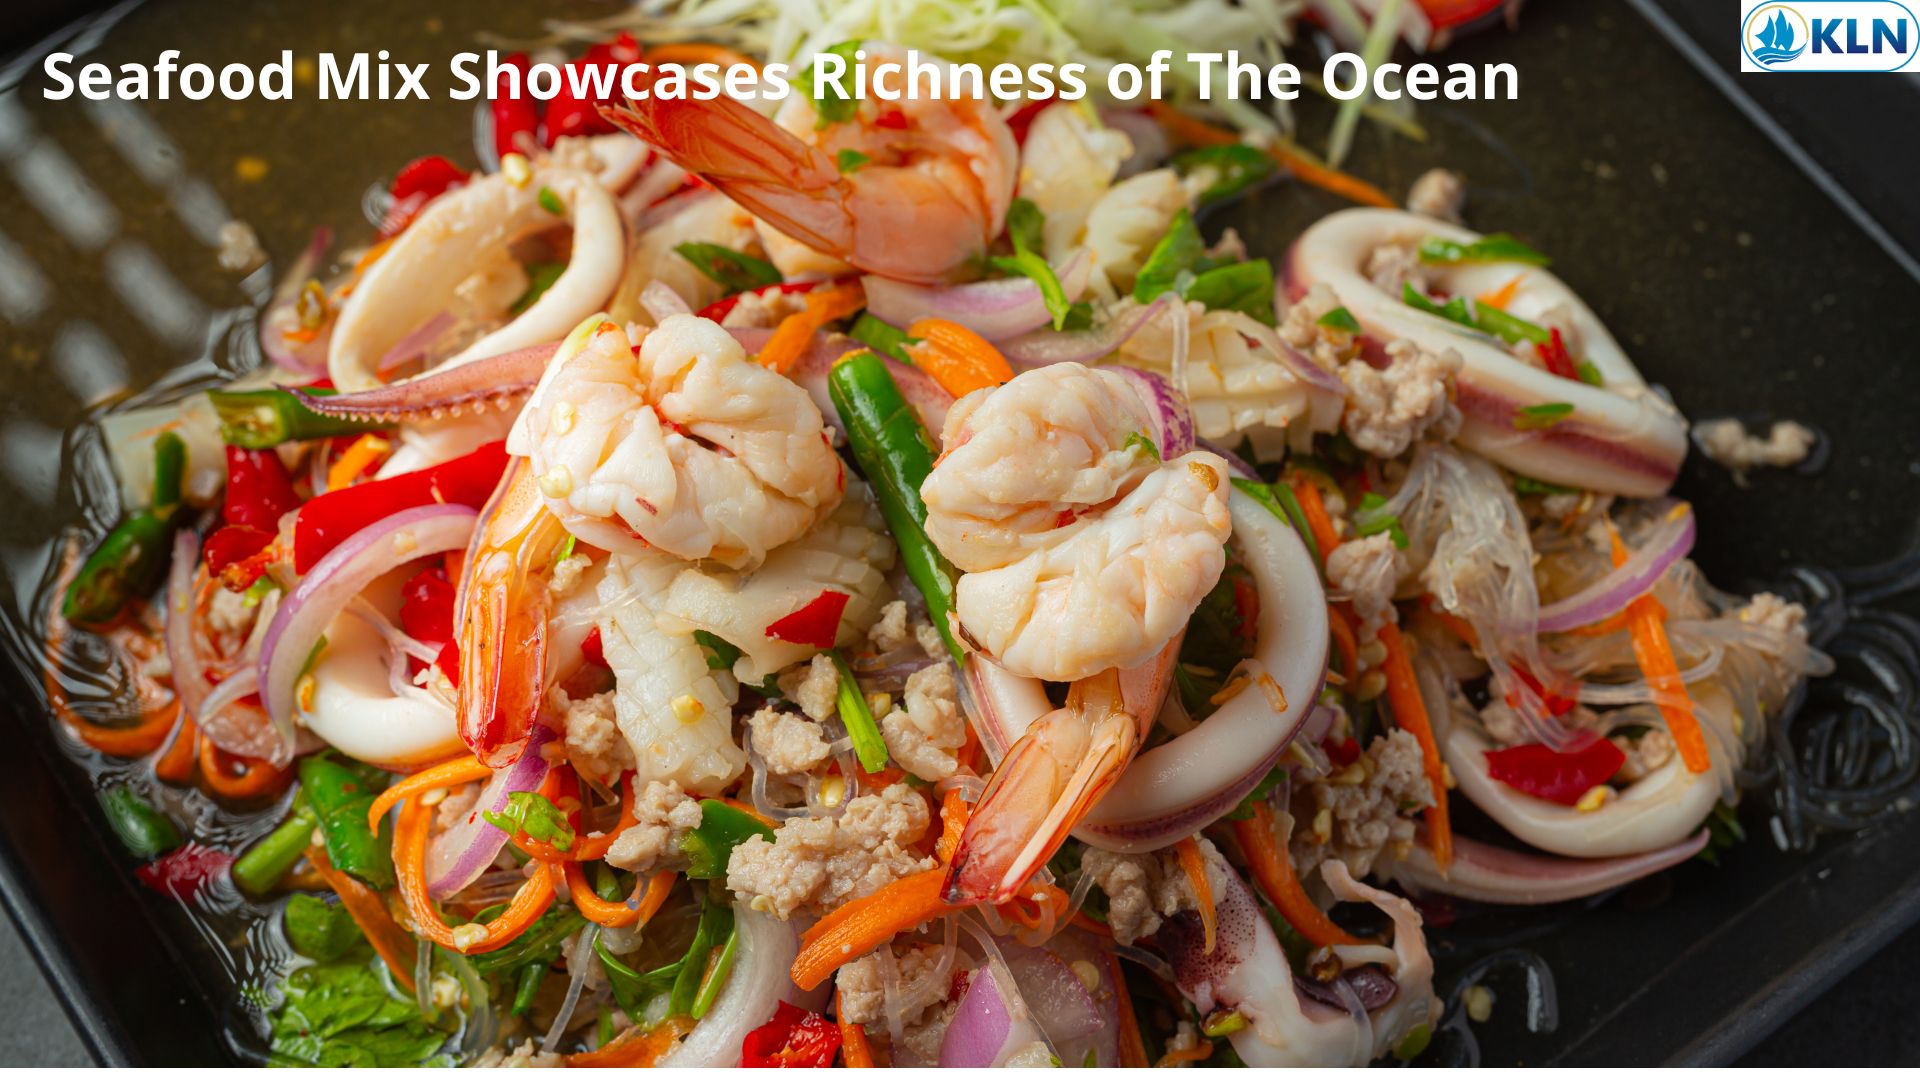 Seafood Mix Showcases Richness of The Ocean